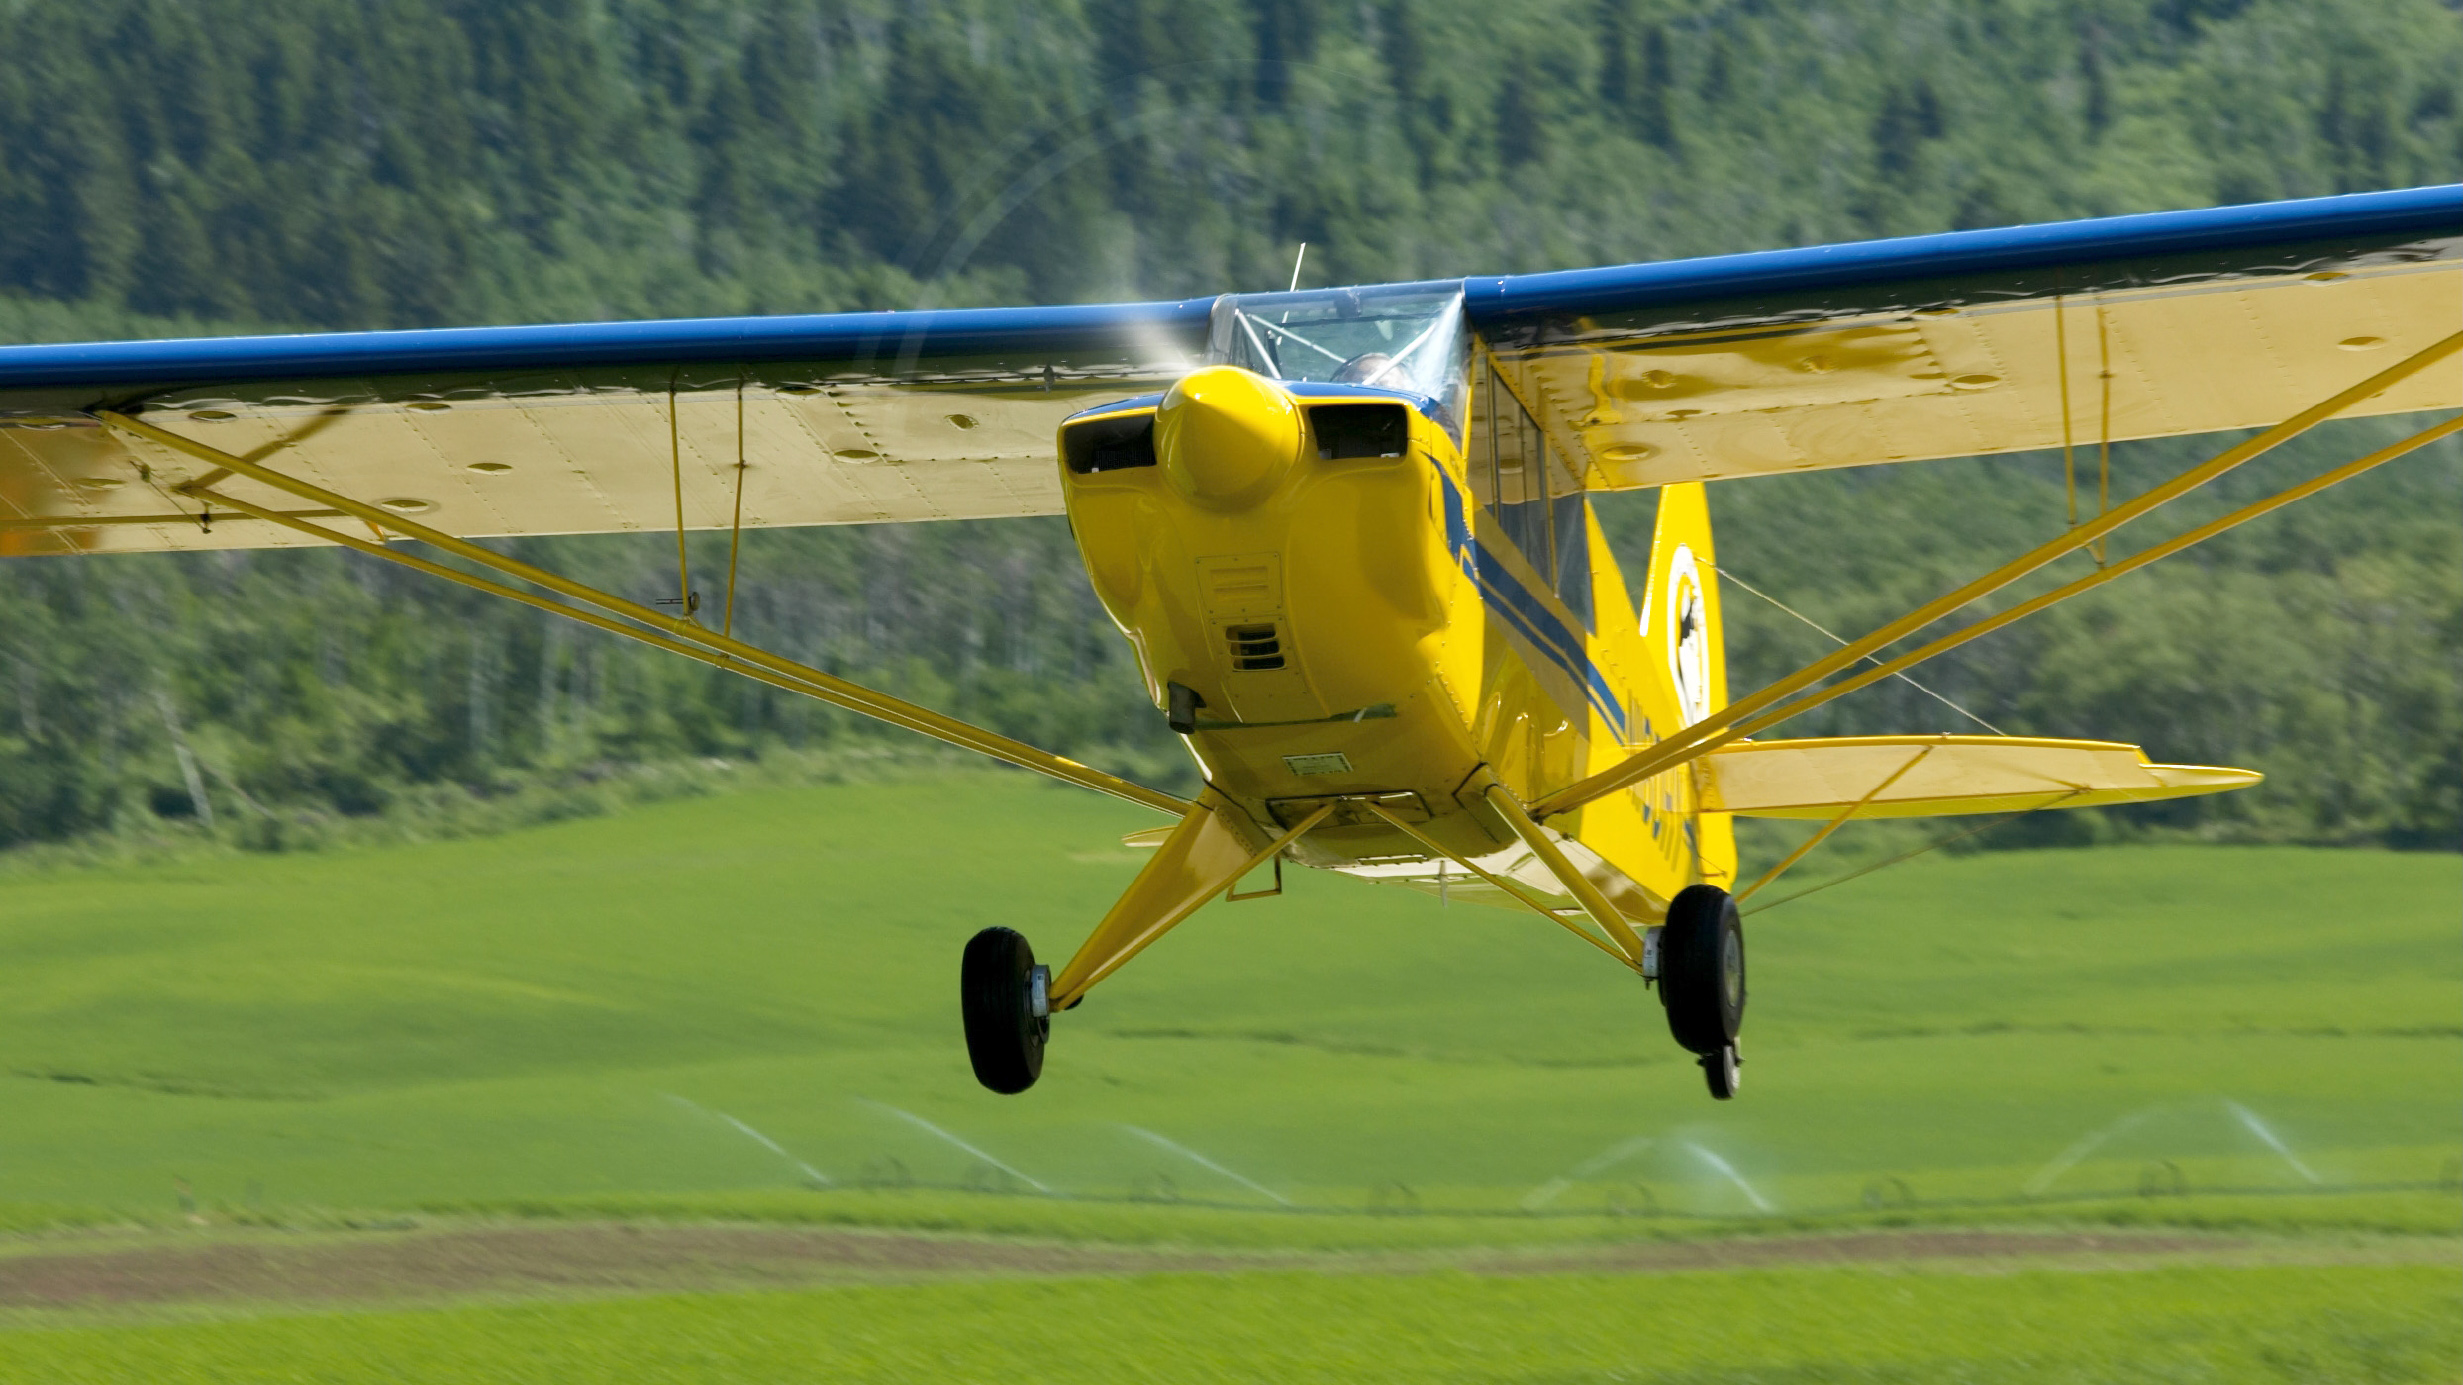 Earning a tailwheel endorsement opens doors to new aviation adventures such as backcountry flying. Photo by Mike Fizer.